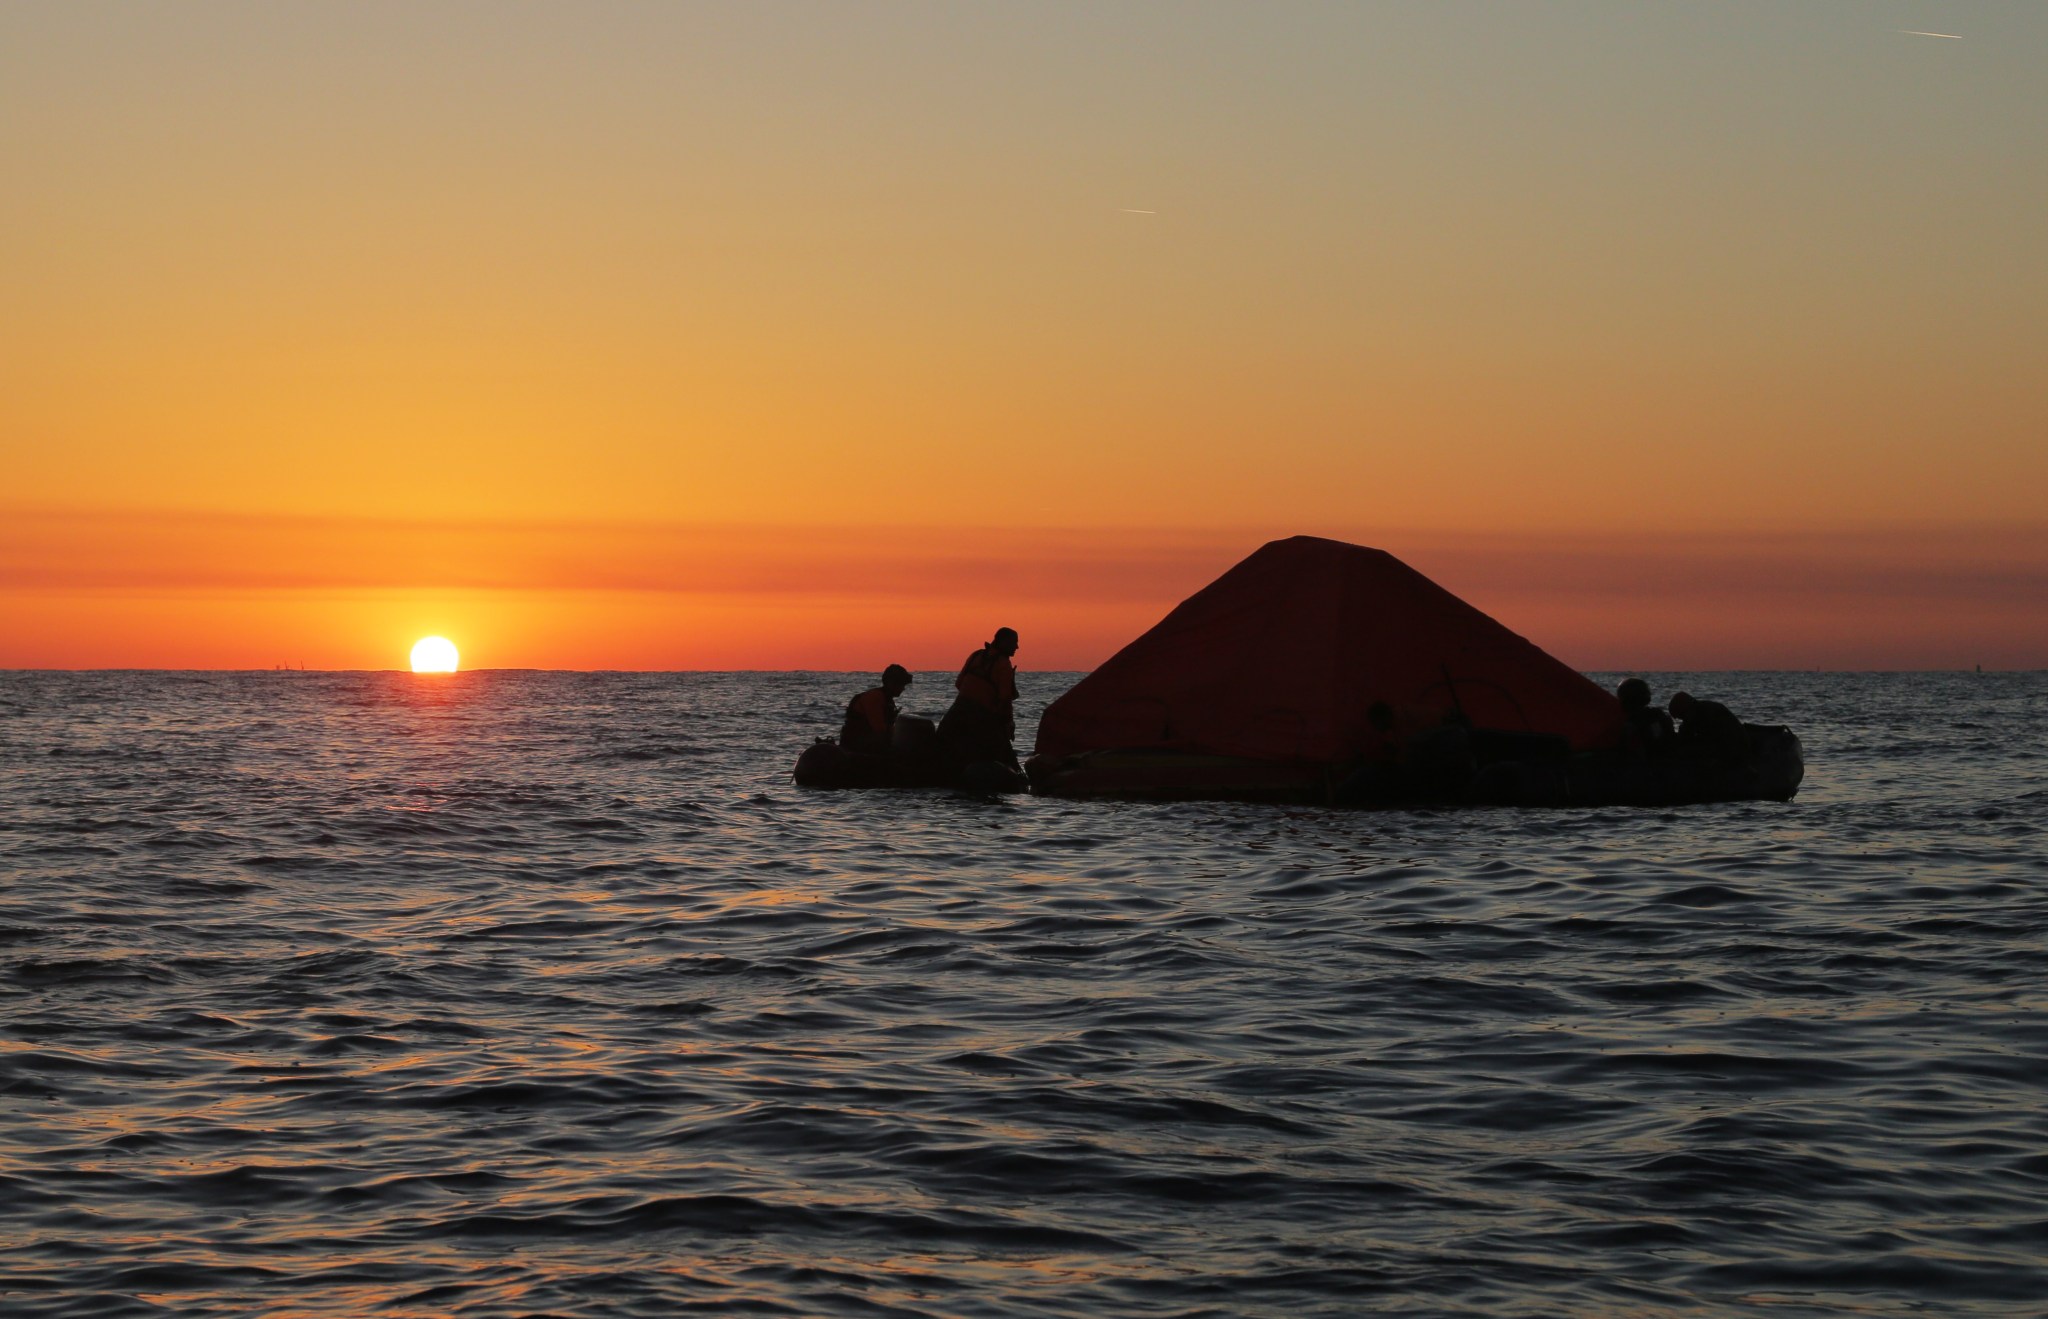 Pararescue specialists secure a covered life raft as the sun sets